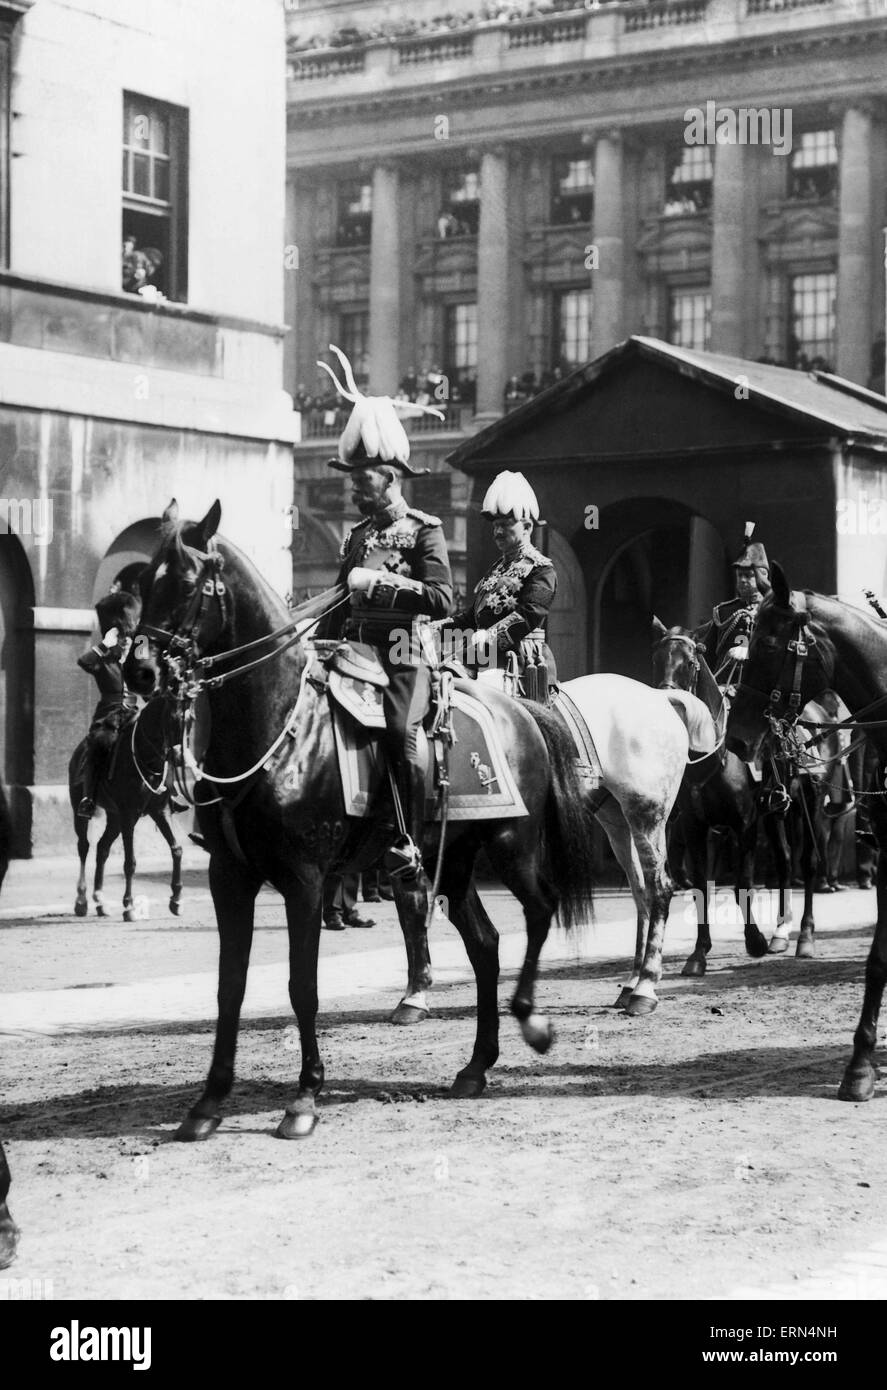 King George, Kaiser Willhelm II of Germany and The Duke of Connaught at the funeral of King Edward VII. Edward died at Sandringham on May 6, 1910, after a series of heart attacks. His coffin lay in state in Westminster Hall before being taken through the streets of London and on to Windsor by train.  The funeral was held in St George's Chapel where he was buried on May 20th 1910. Stock Photo